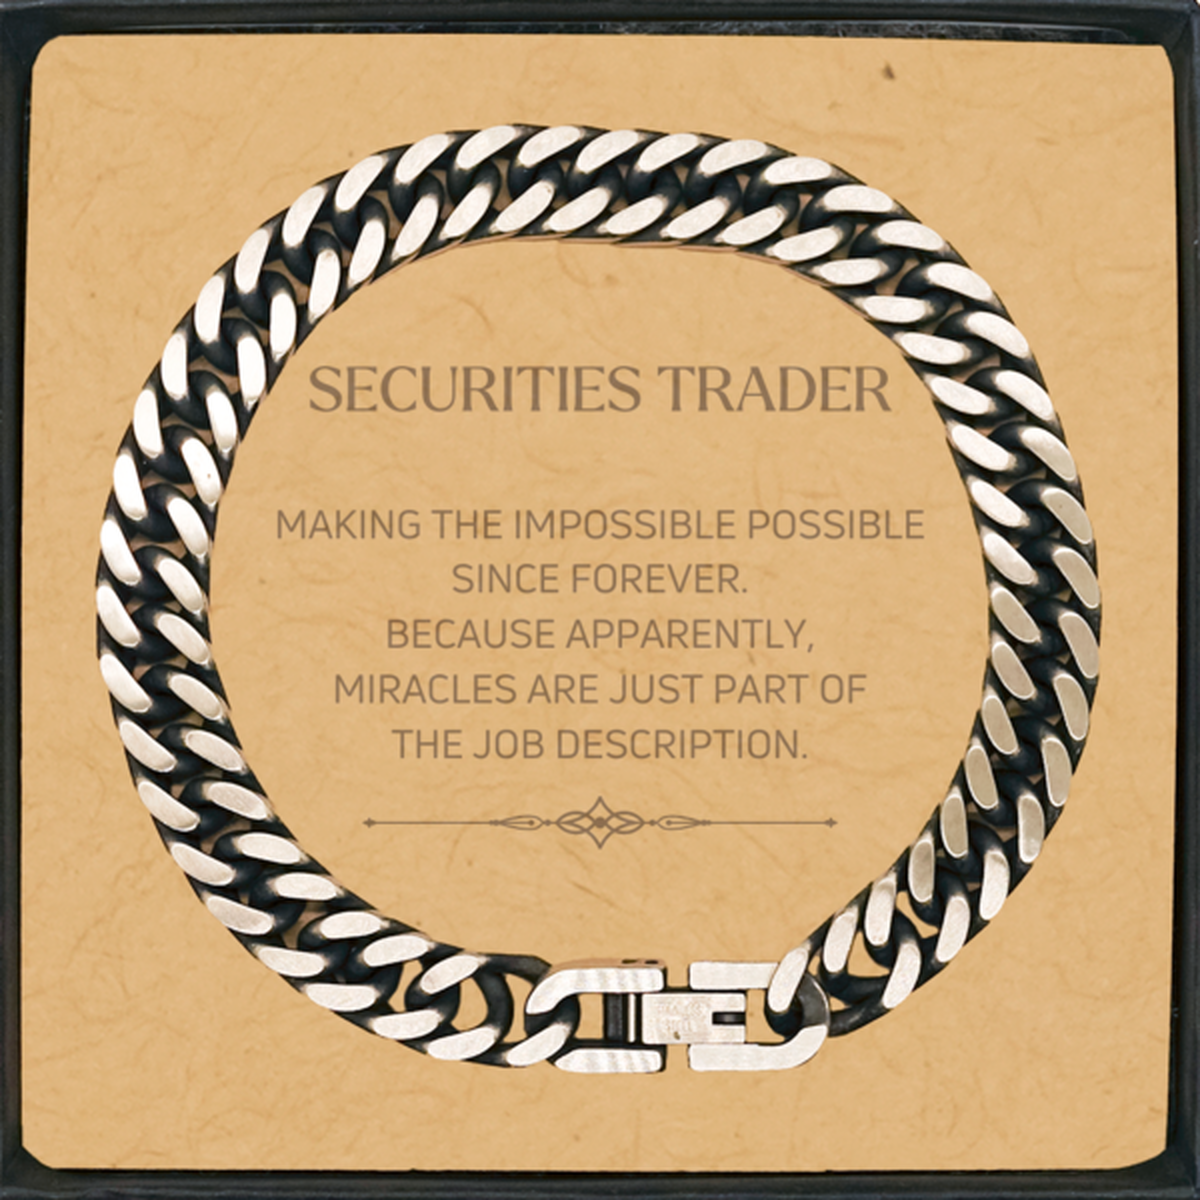 Funny Securities Trader Gifts, Miracles are just part of the job description, Inspirational Birthday Cuban Link Chain Bracelet For Securities Trader, Men, Women, Coworkers, Friends, Boss